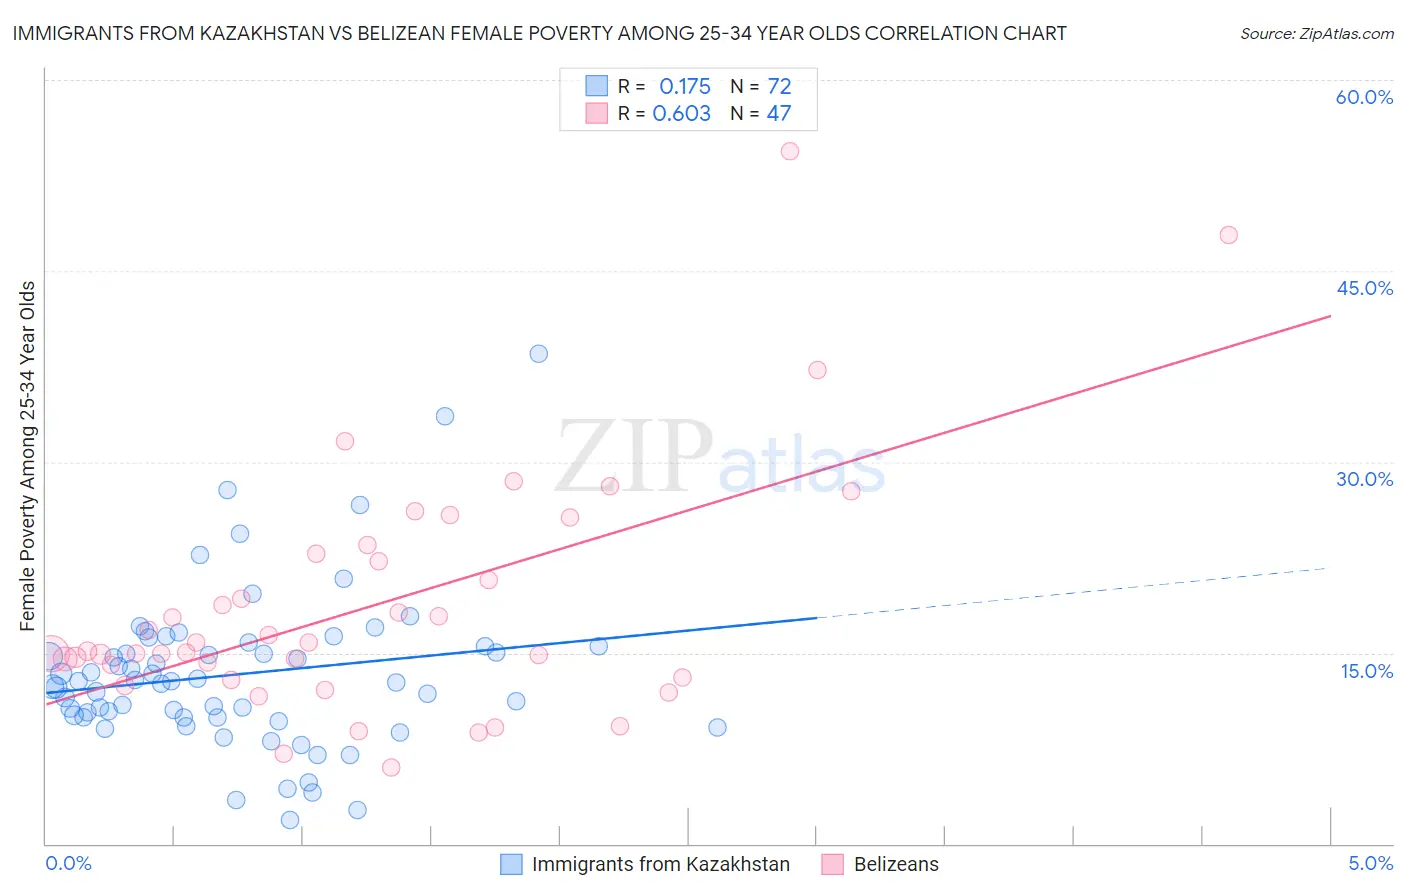 Immigrants from Kazakhstan vs Belizean Female Poverty Among 25-34 Year Olds